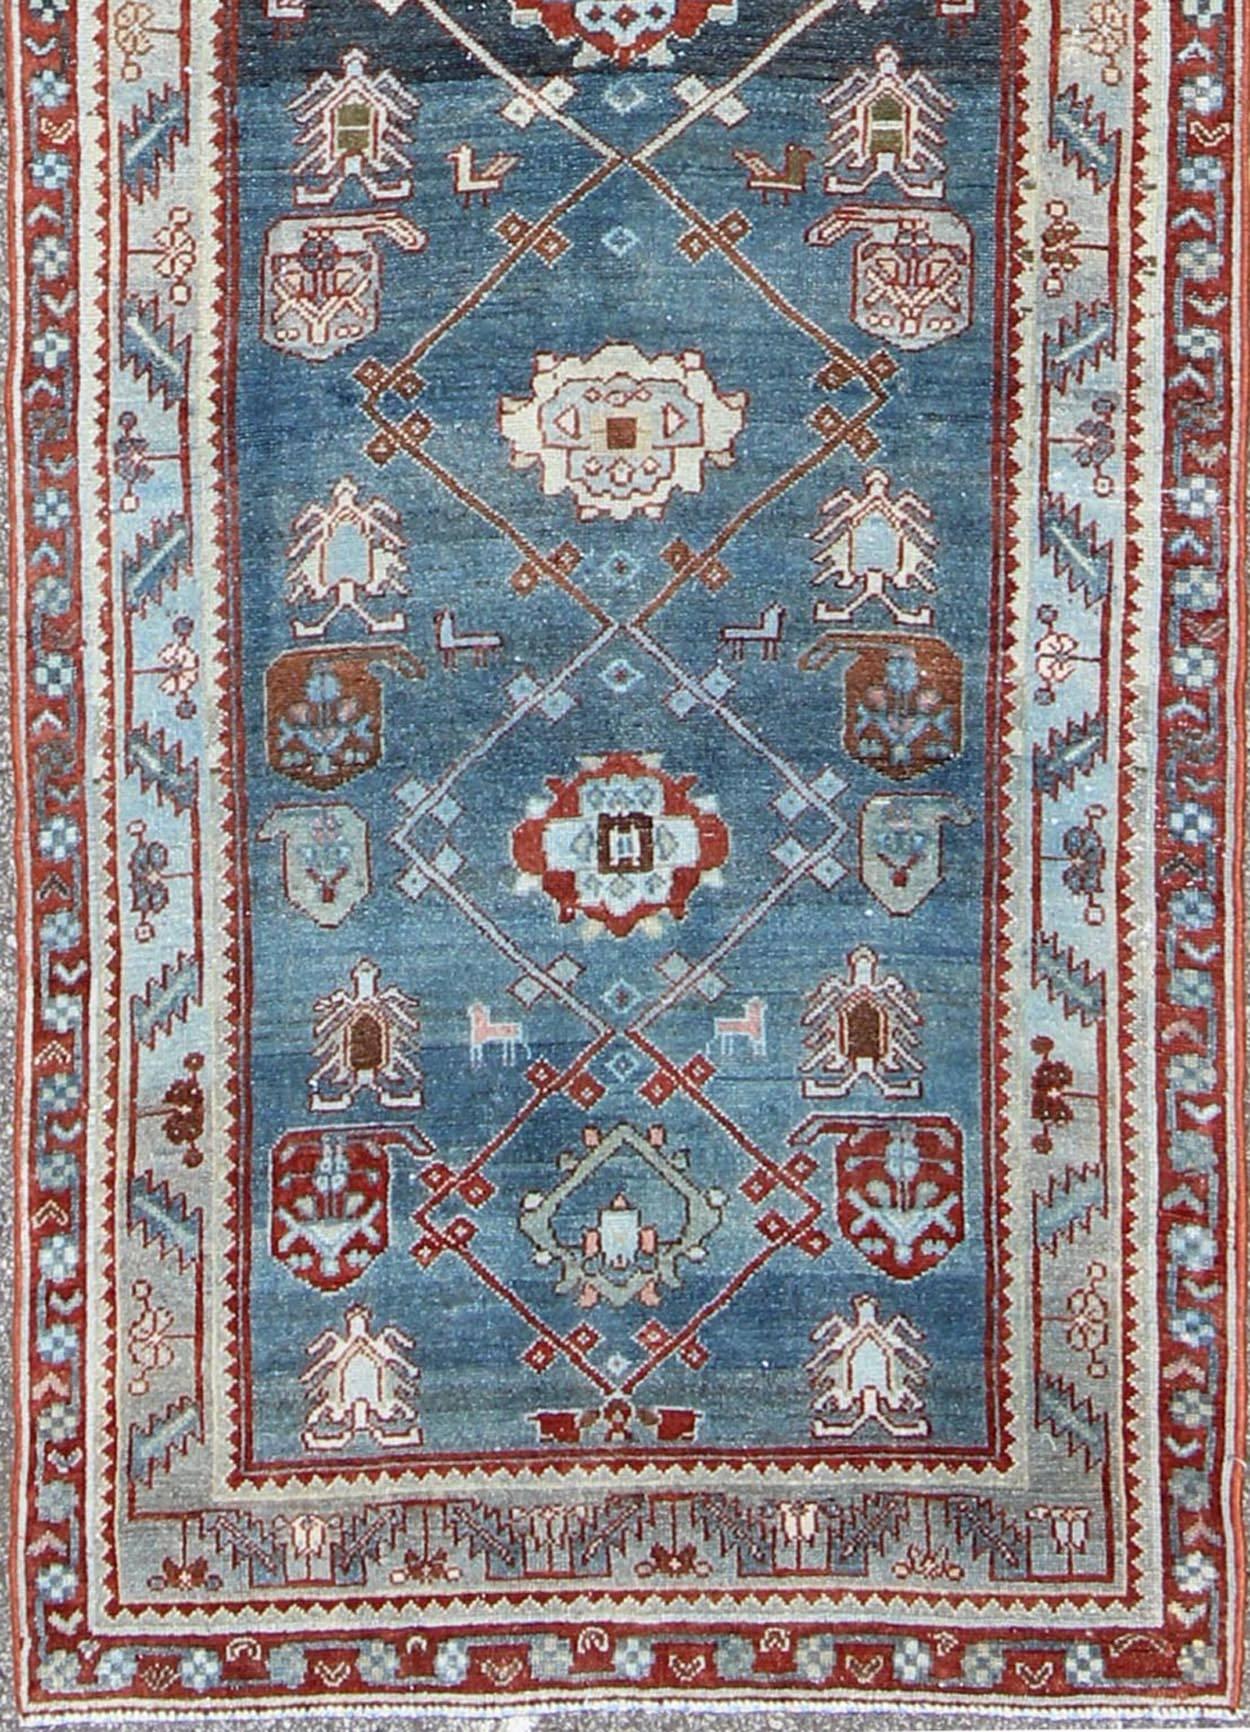 Vintage Persian Malayer runner with red geometric design and blue background, rug na-180016, country of origin / type: Iran / Malayer, circa 1910.
 
This magnificent early 20th century antique Persian Malayer runner bears a beautiful, all-over